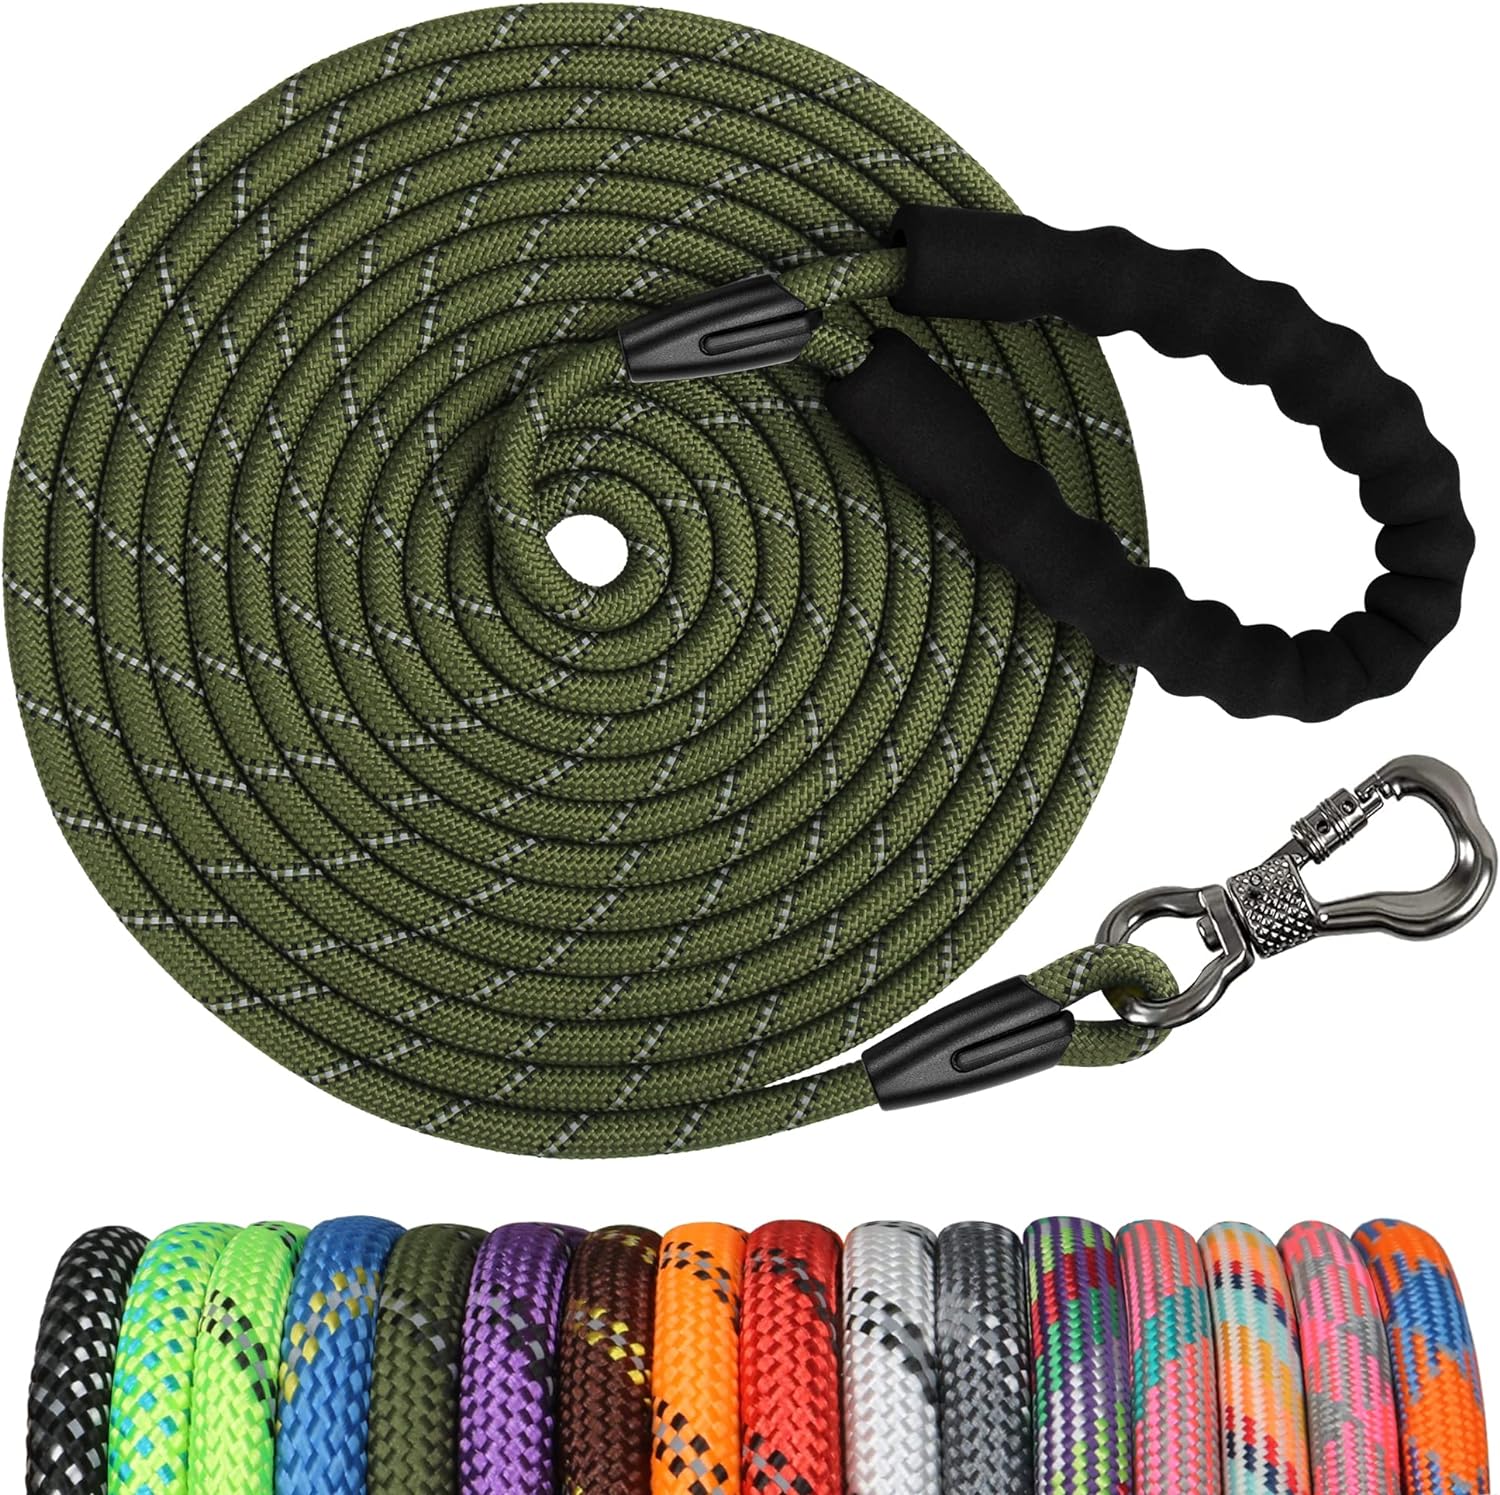 NTR Heavy Duty Dog Leash, 15FT Training Leash with Swivel Lockable Hook, Padded Handle and Highly Reflective Threads, Dog Lead for Walking, Hunting, Camping, Backyard for Small Medium Large Dog